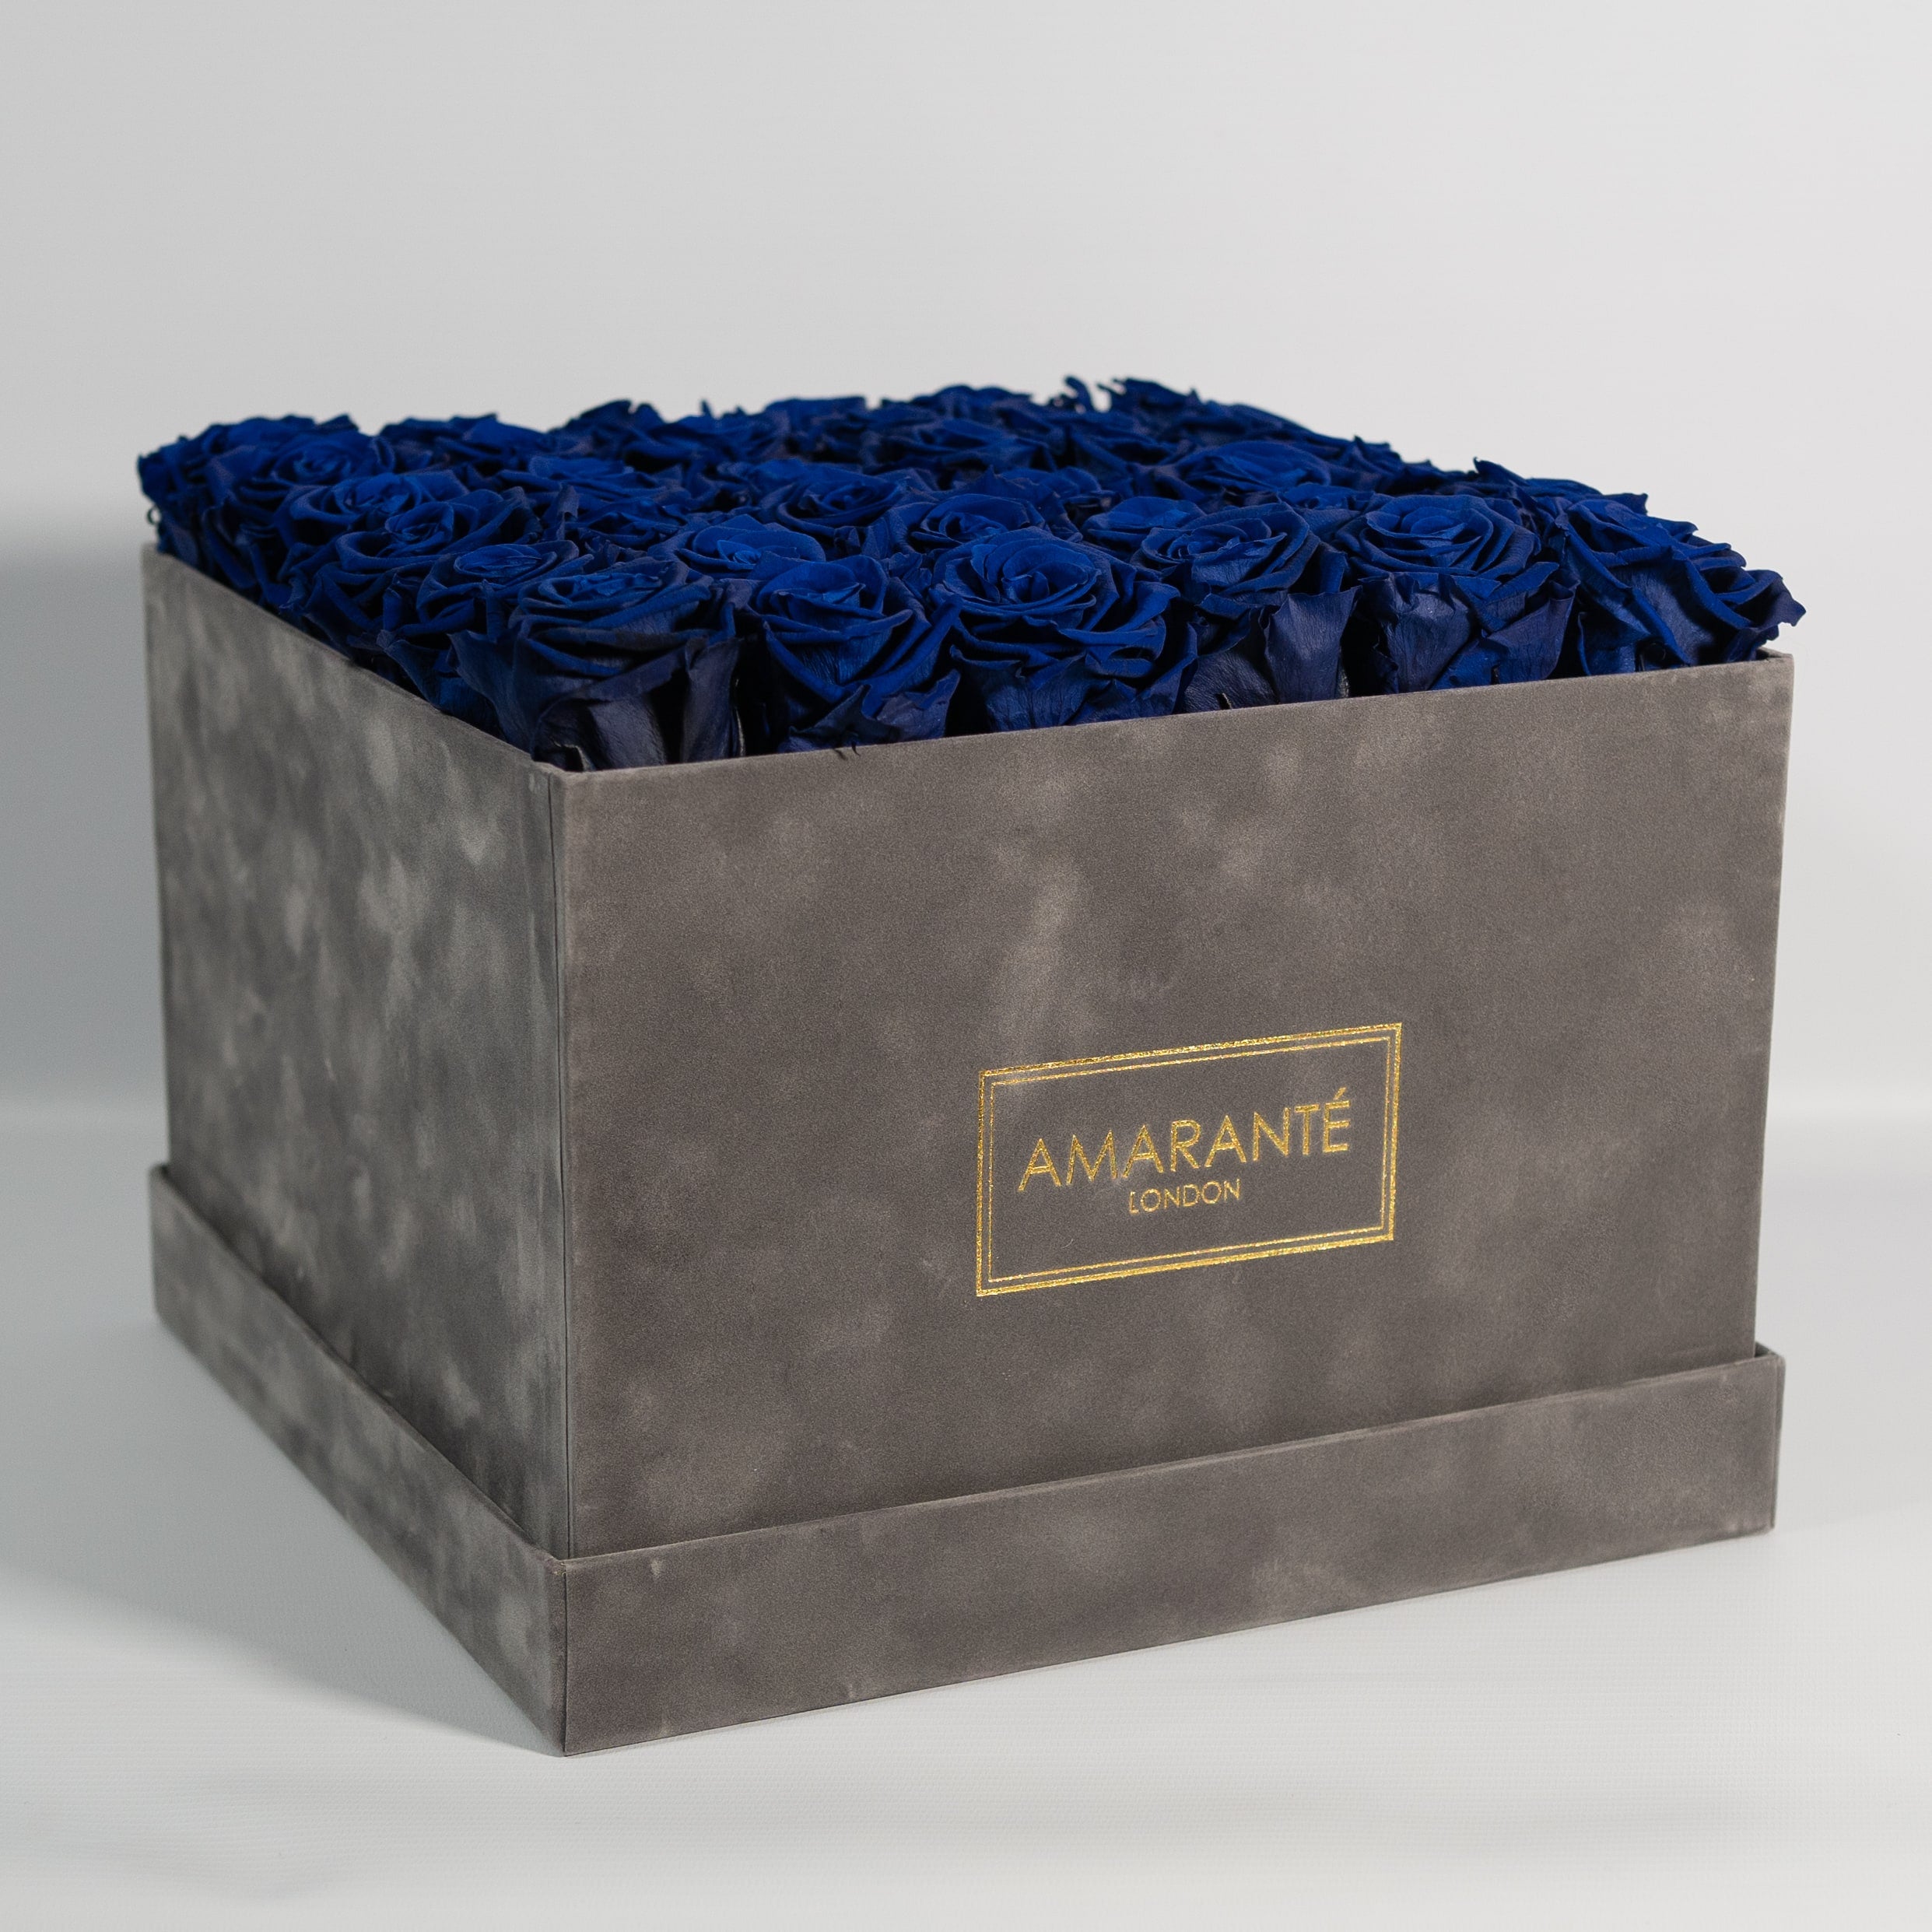 Gorgeous royal blue Roses implying security and protection. 